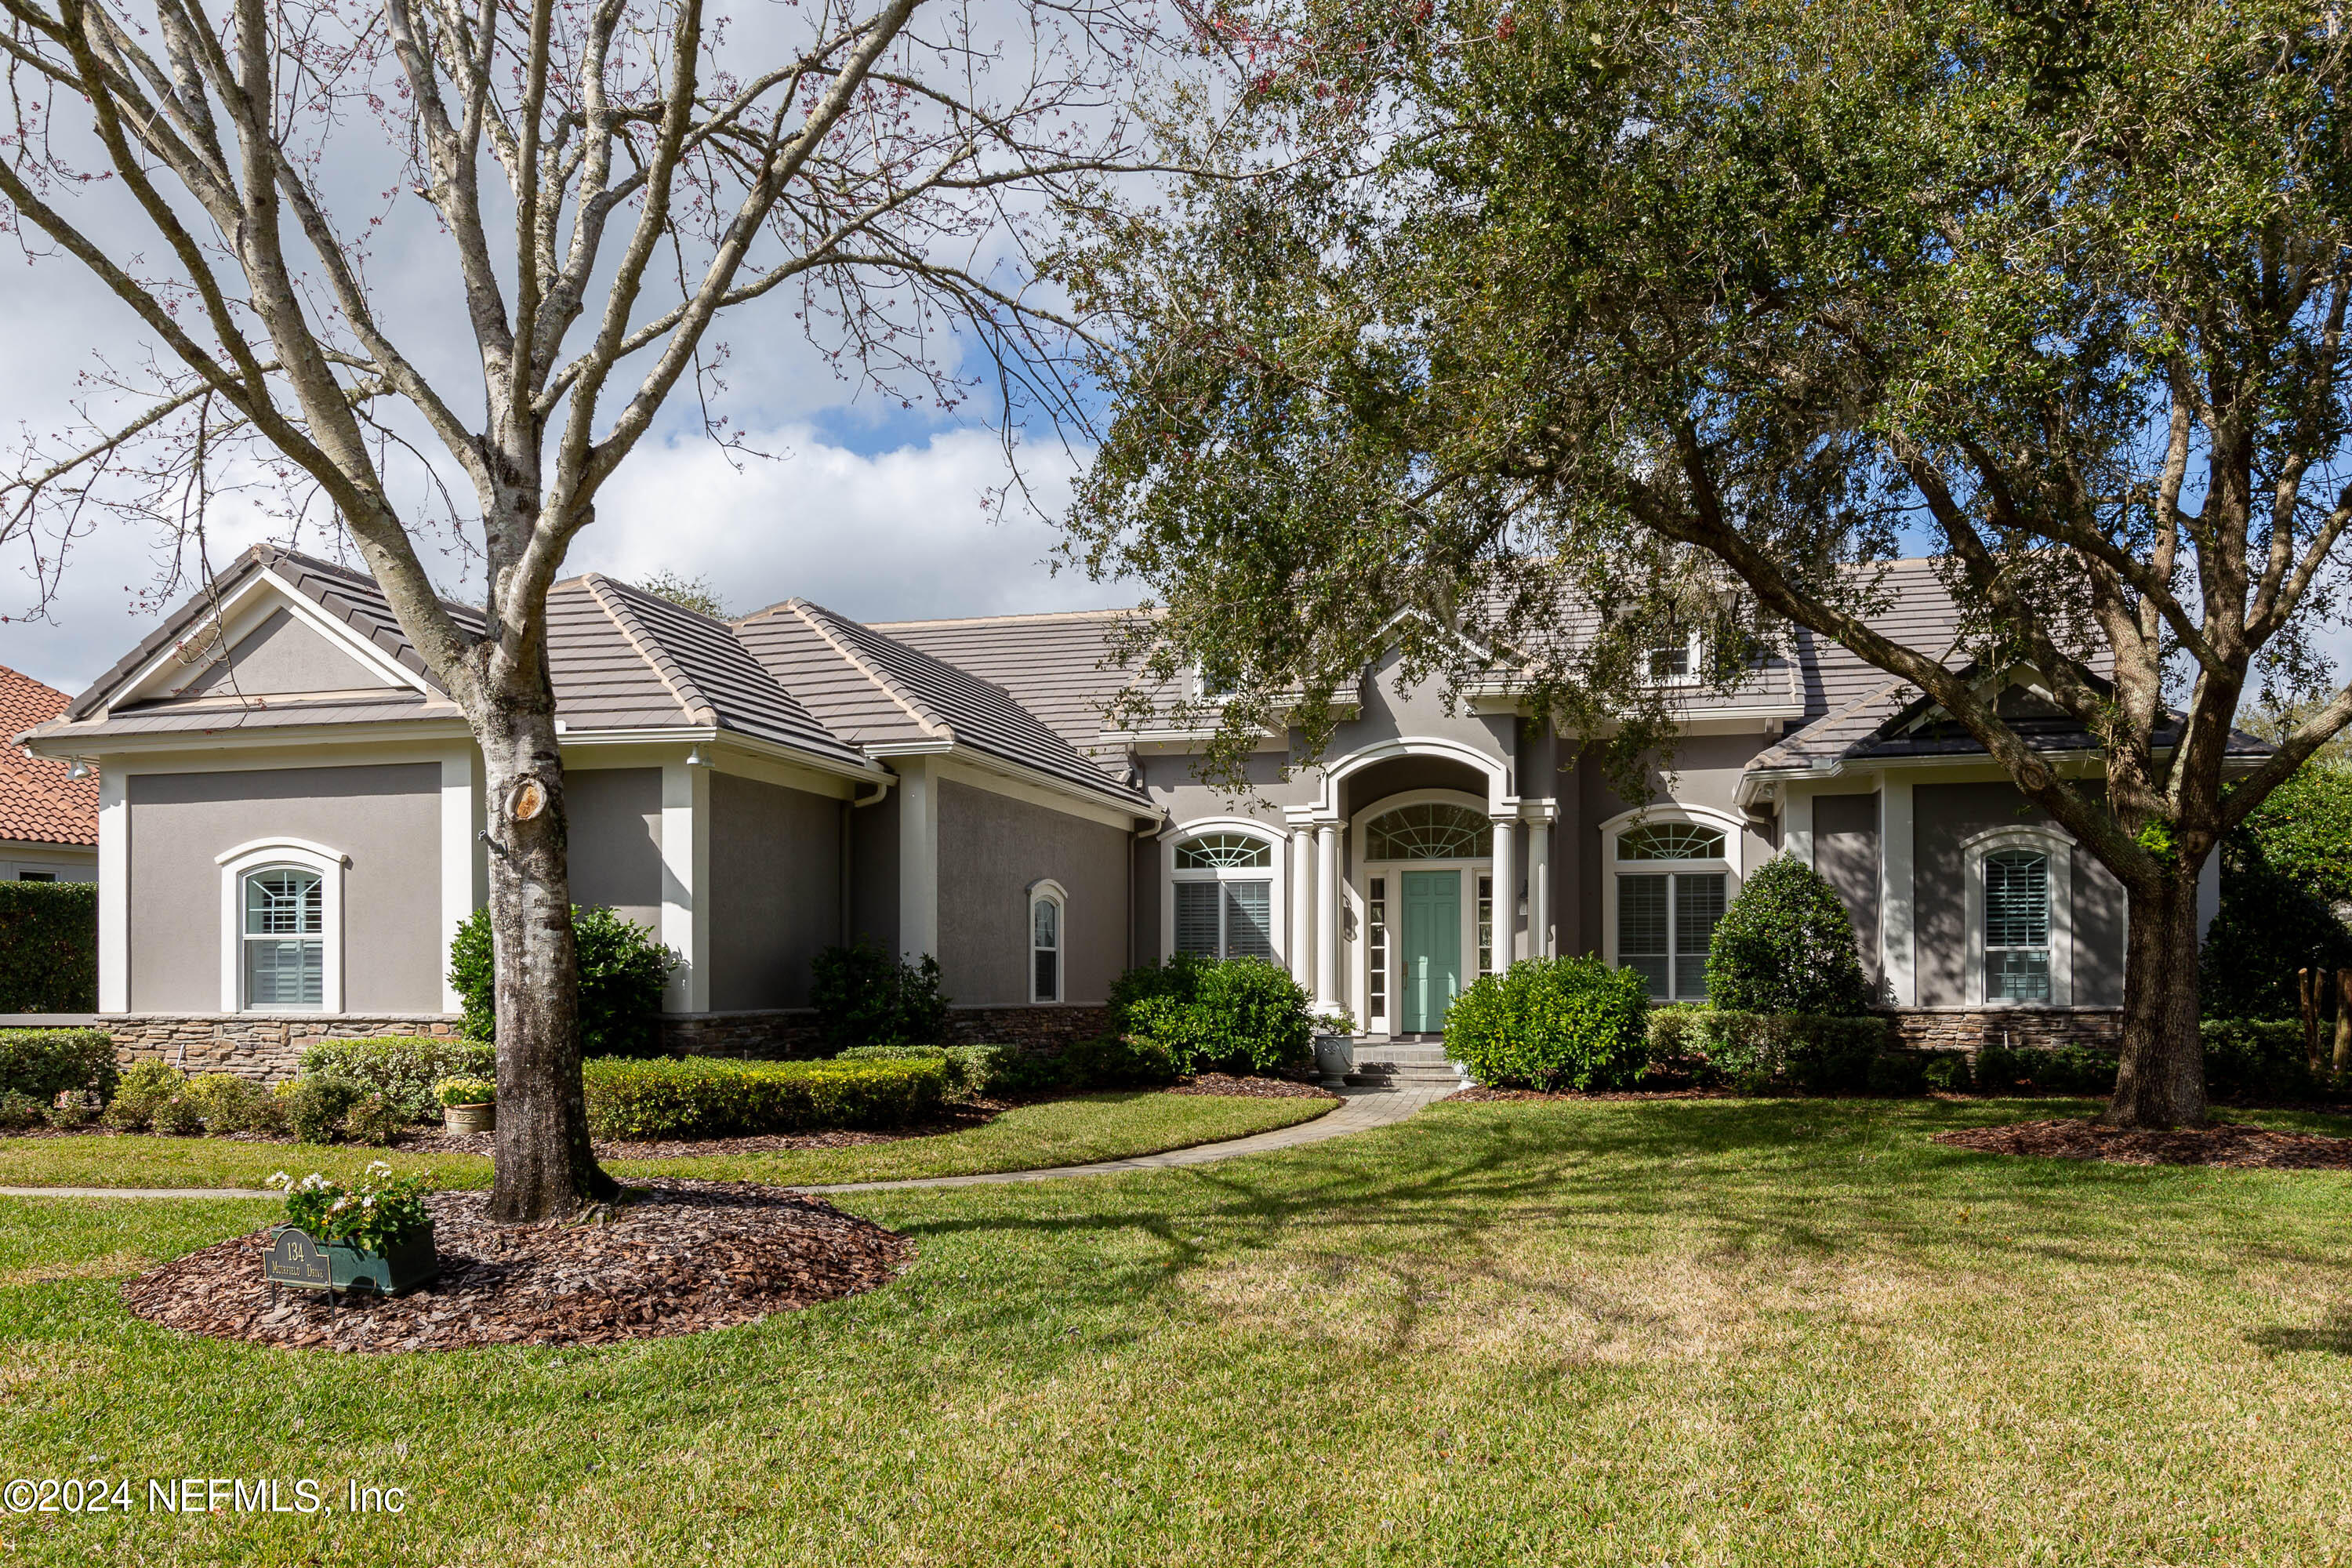 Ponte Vedra Beach, FL home for sale located at 134 MUIRFIELD Drive, Ponte Vedra Beach, FL 32082